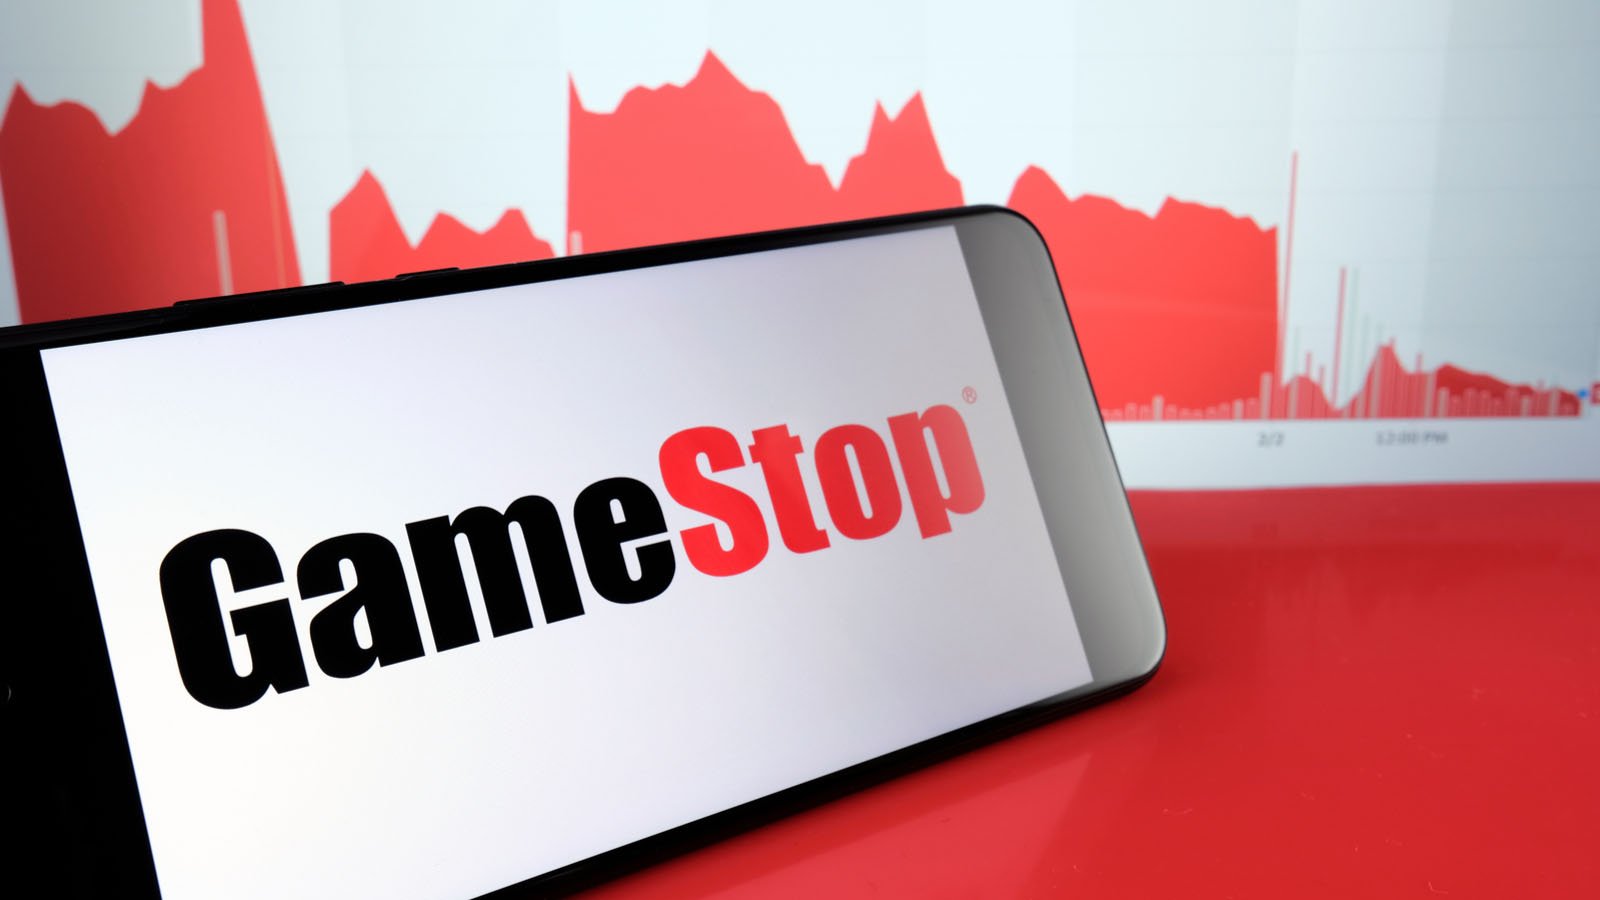 GME stock: the game will end again for GameStop